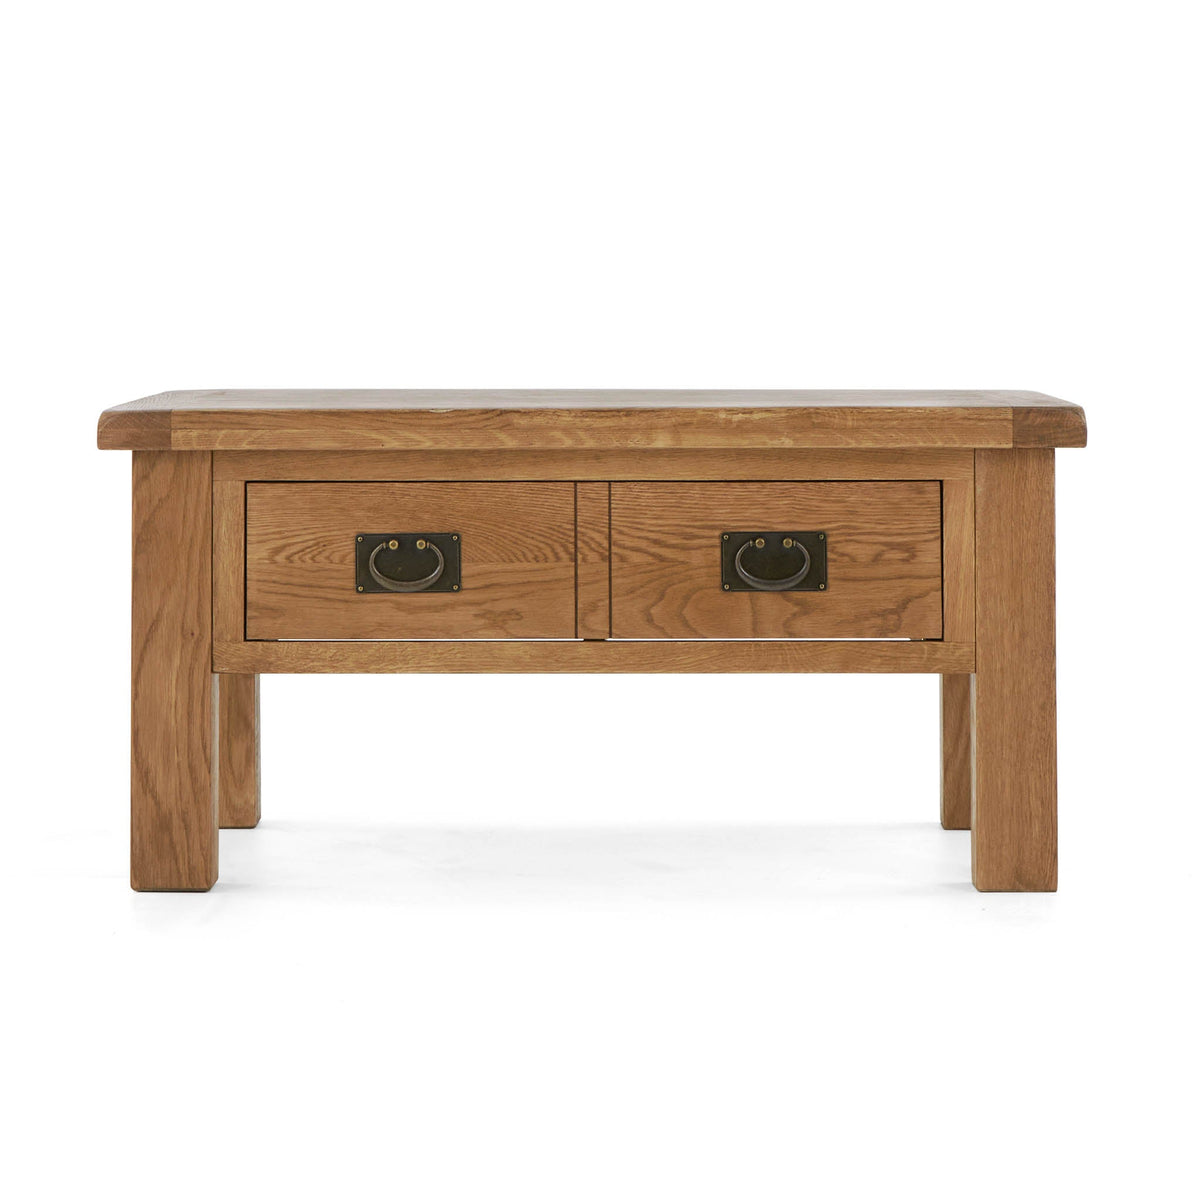 Zelah Oak Coffee Table with Drawer - Front view